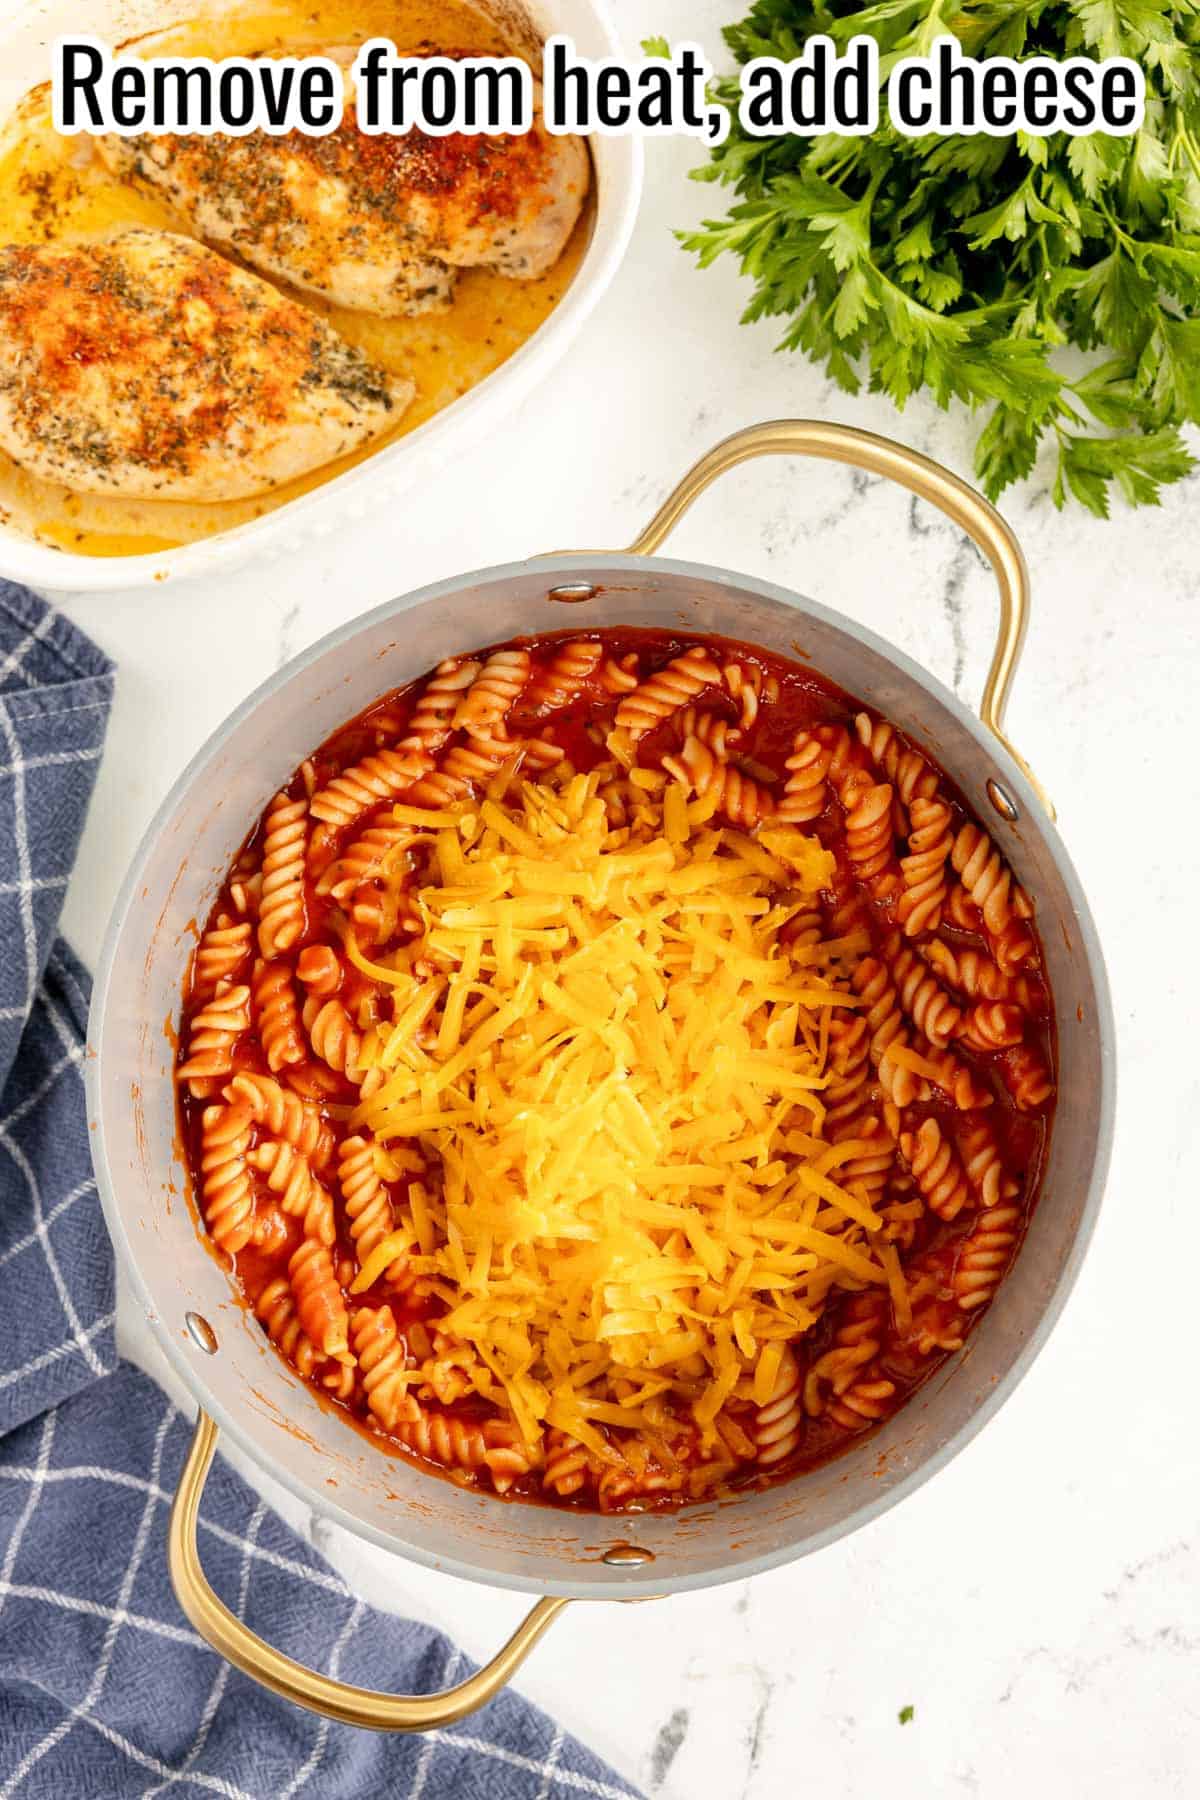 cheese and pasta added to a red sauce in a pot.